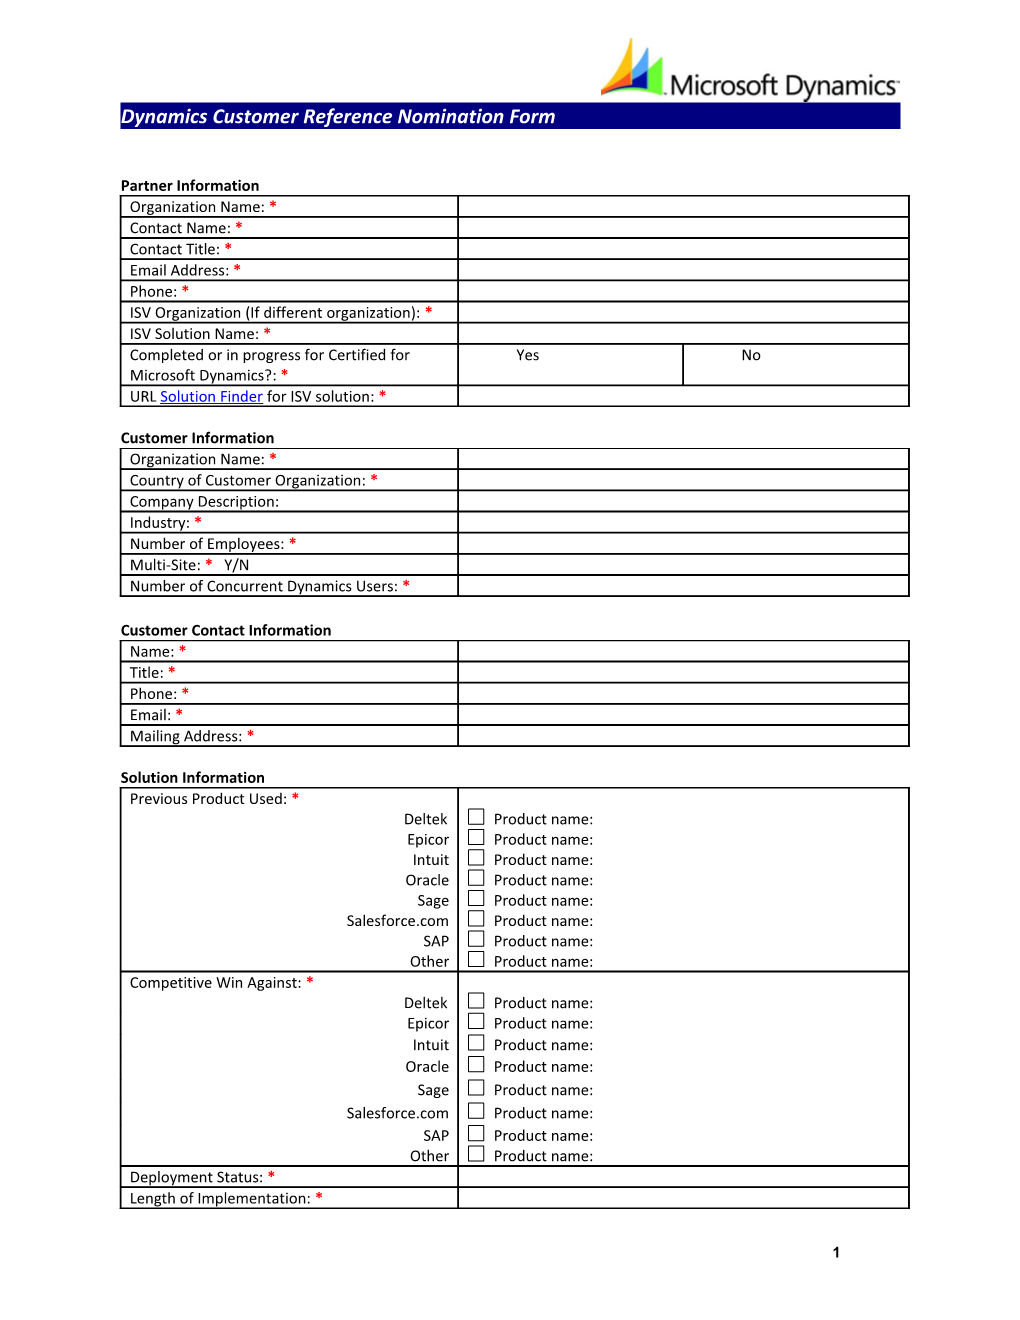 Dynamics-Customer-Reference-Nomination-Form